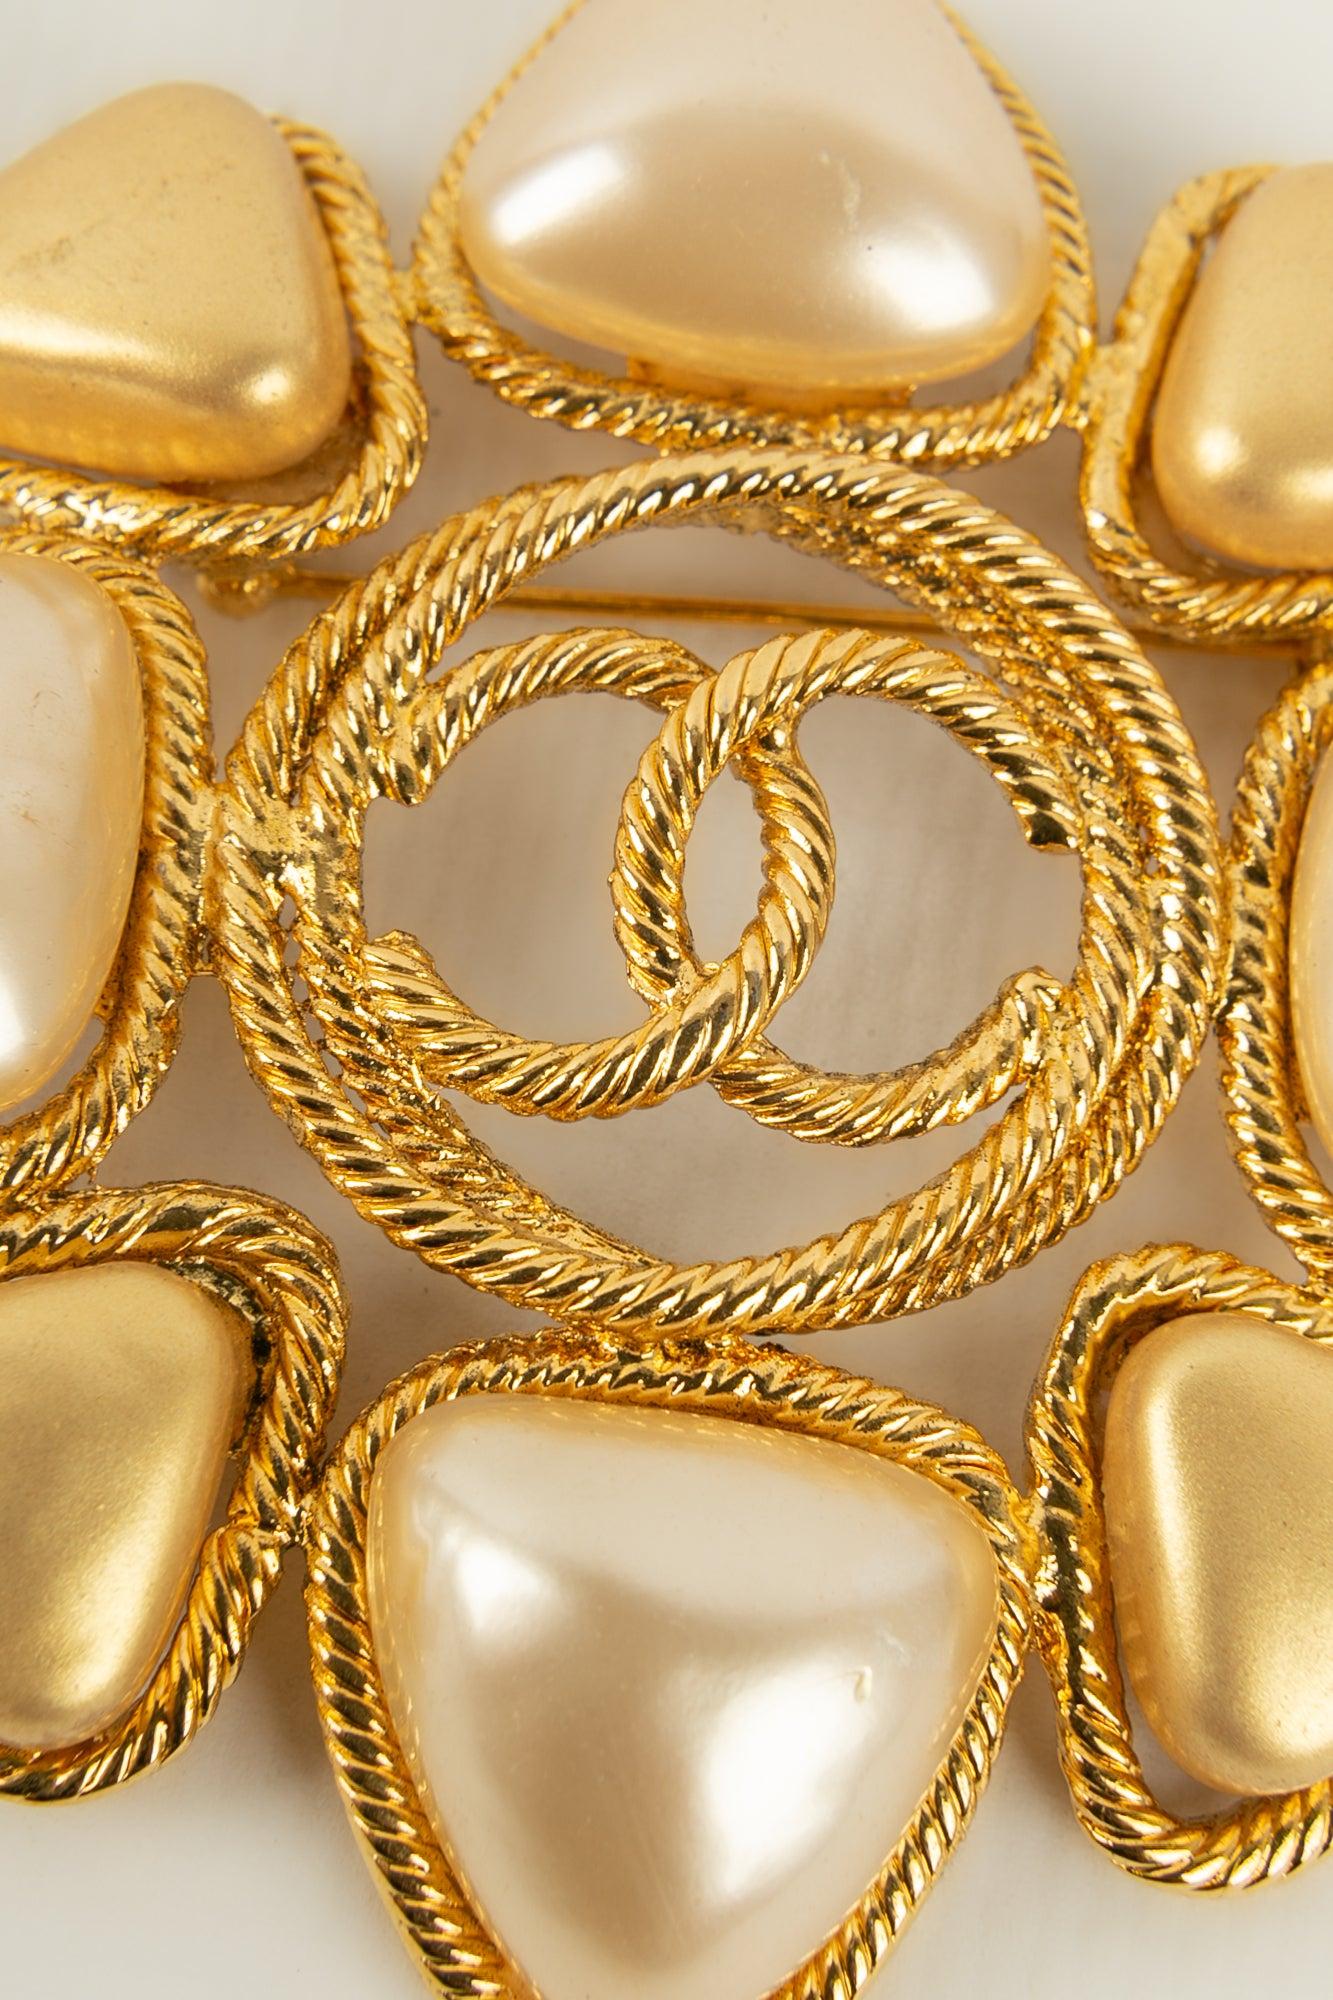 Women's Chanel Brooch in Gold-Plated Metal and Pearly Glass Paste, 1990s For Sale